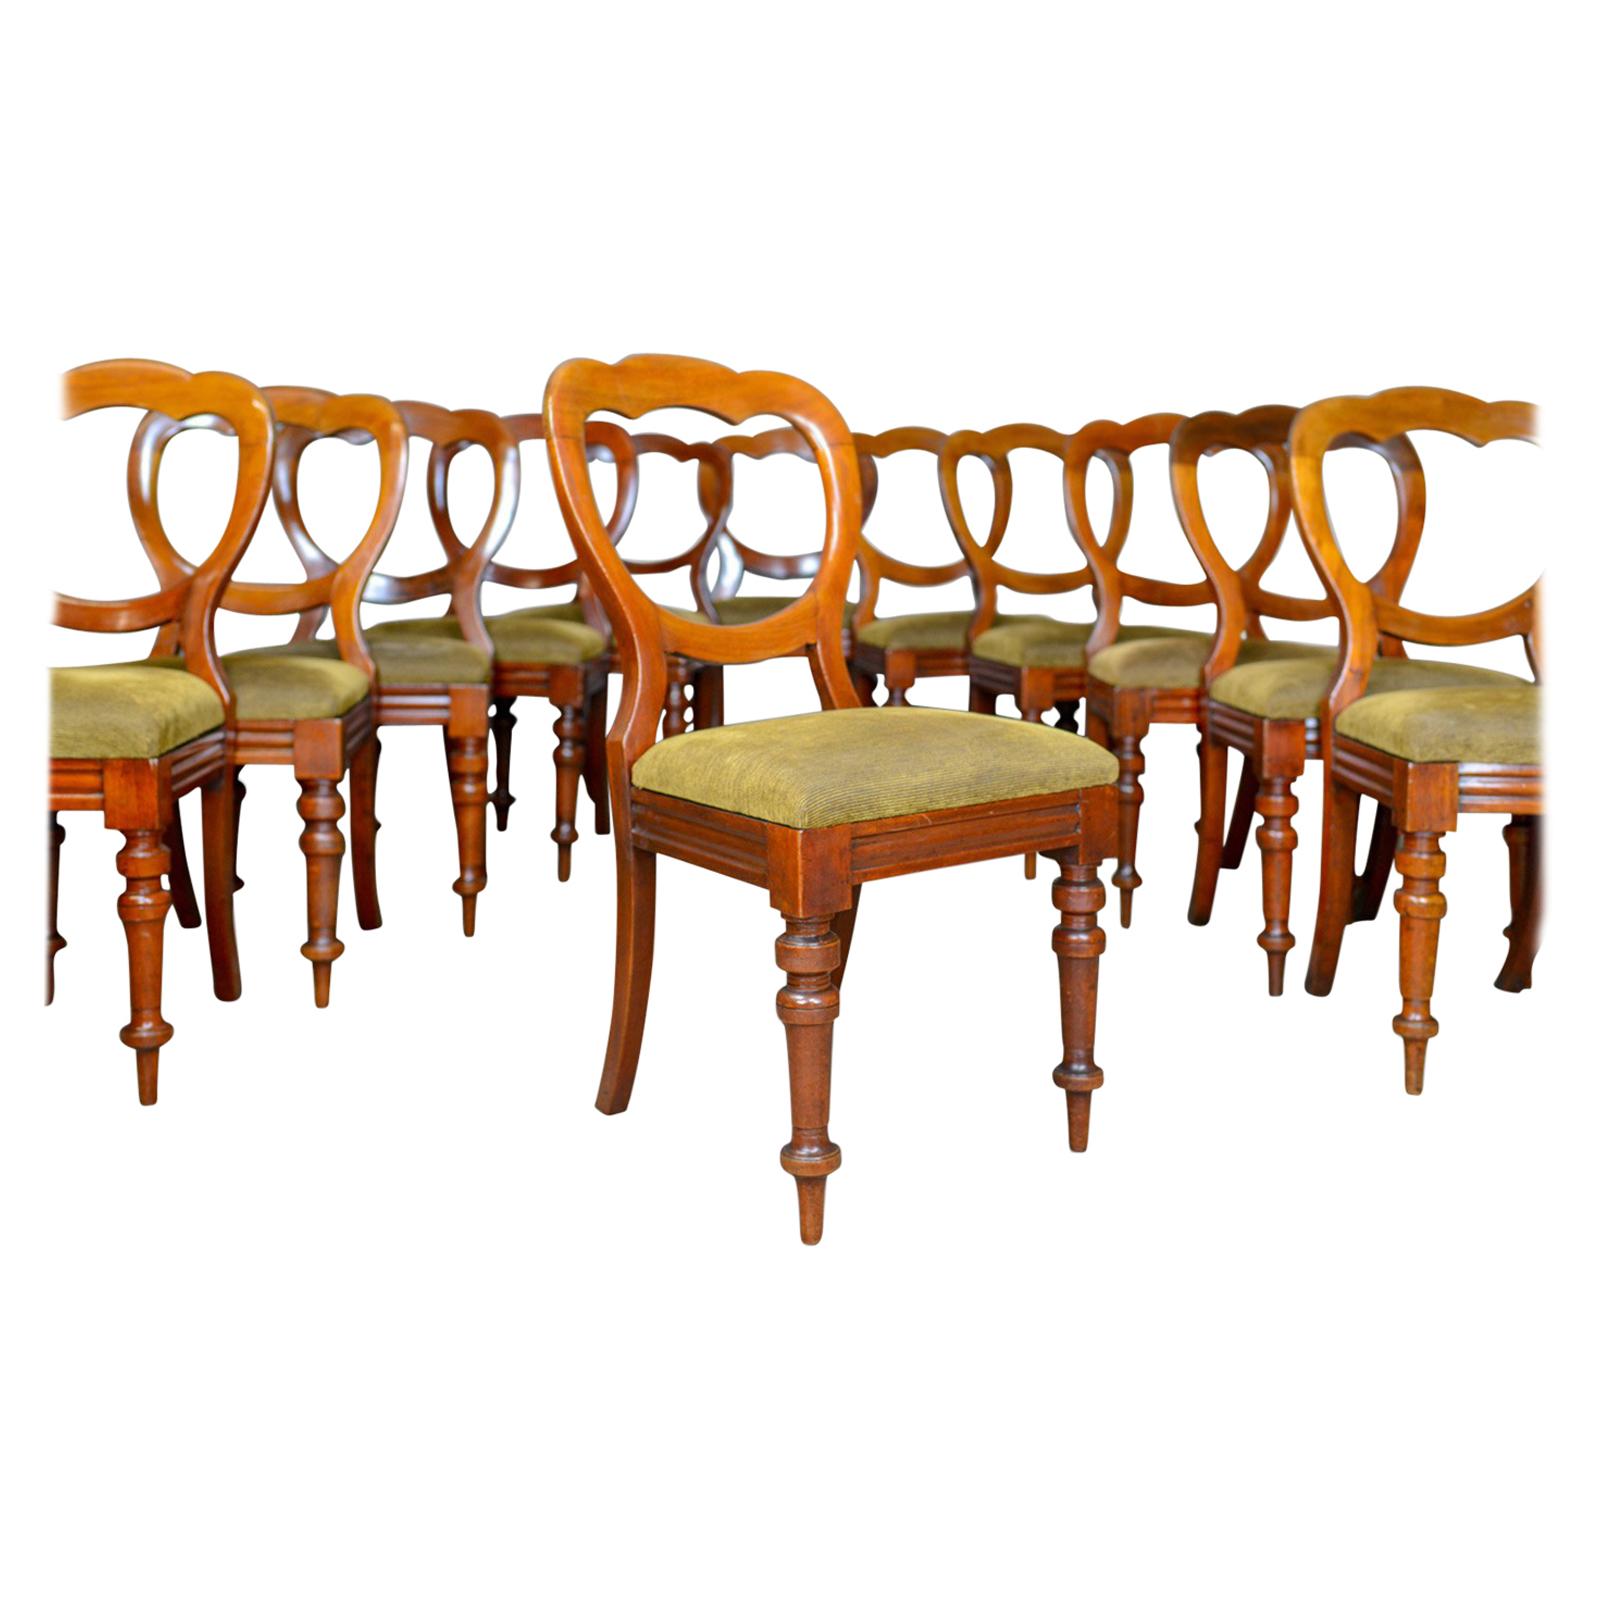 Long Set of 12 Antique Dining Chairs, English, Victorian, Balloon Back